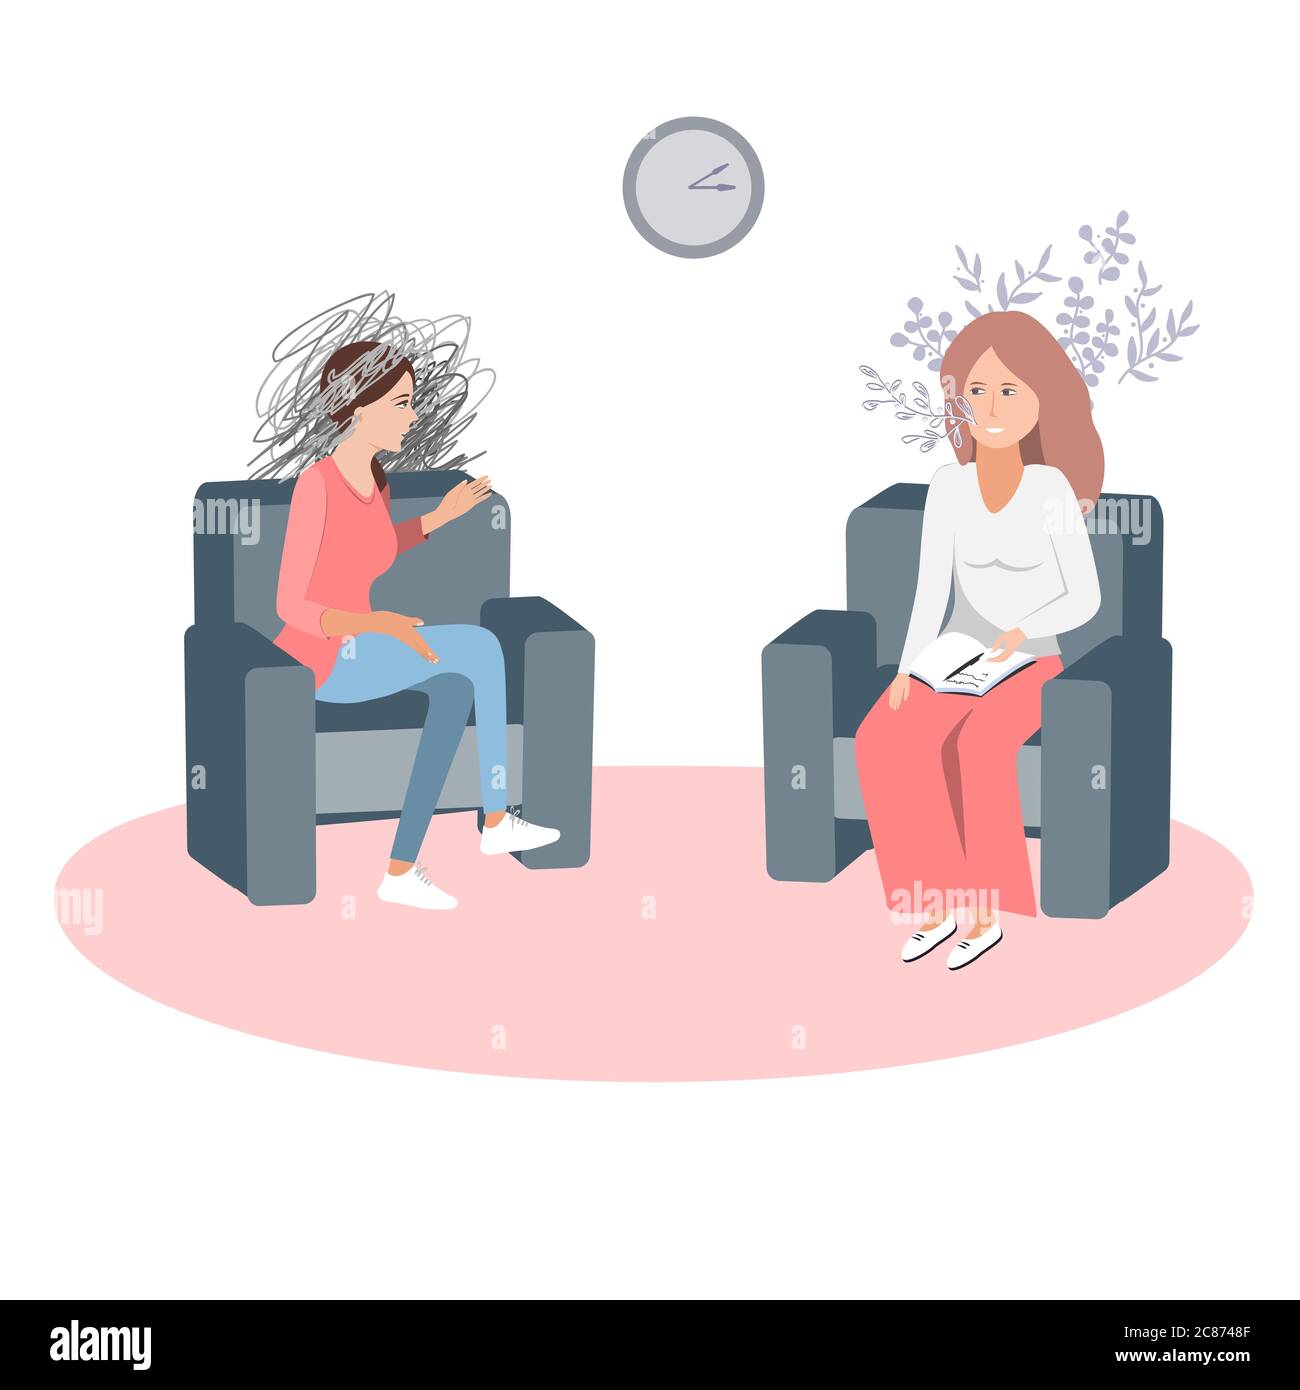 Gestalt psychotherapy session vector illustration. Woman psychologist and talking woman patient. Work with feelings and emotions, society psychiatry Stock Vector